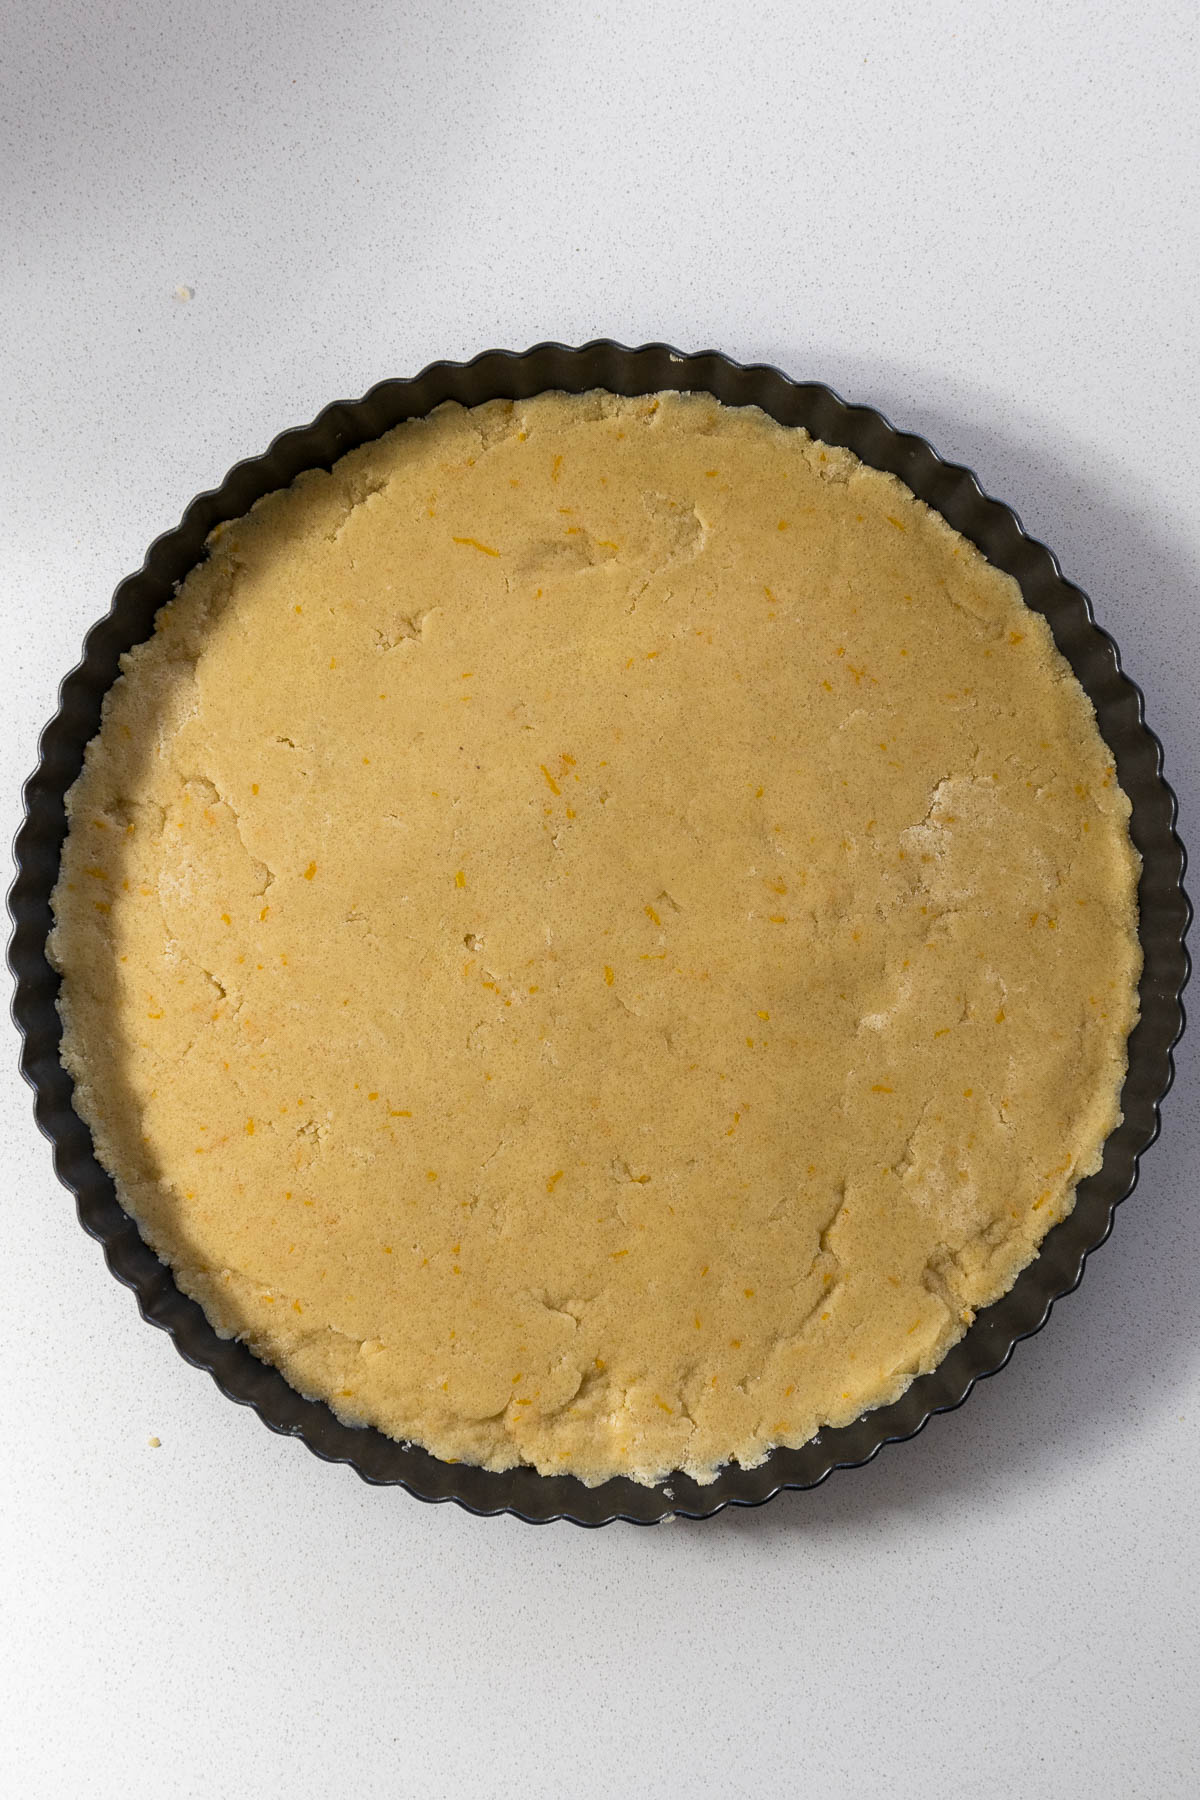 Biscuits pressed into tart tin.